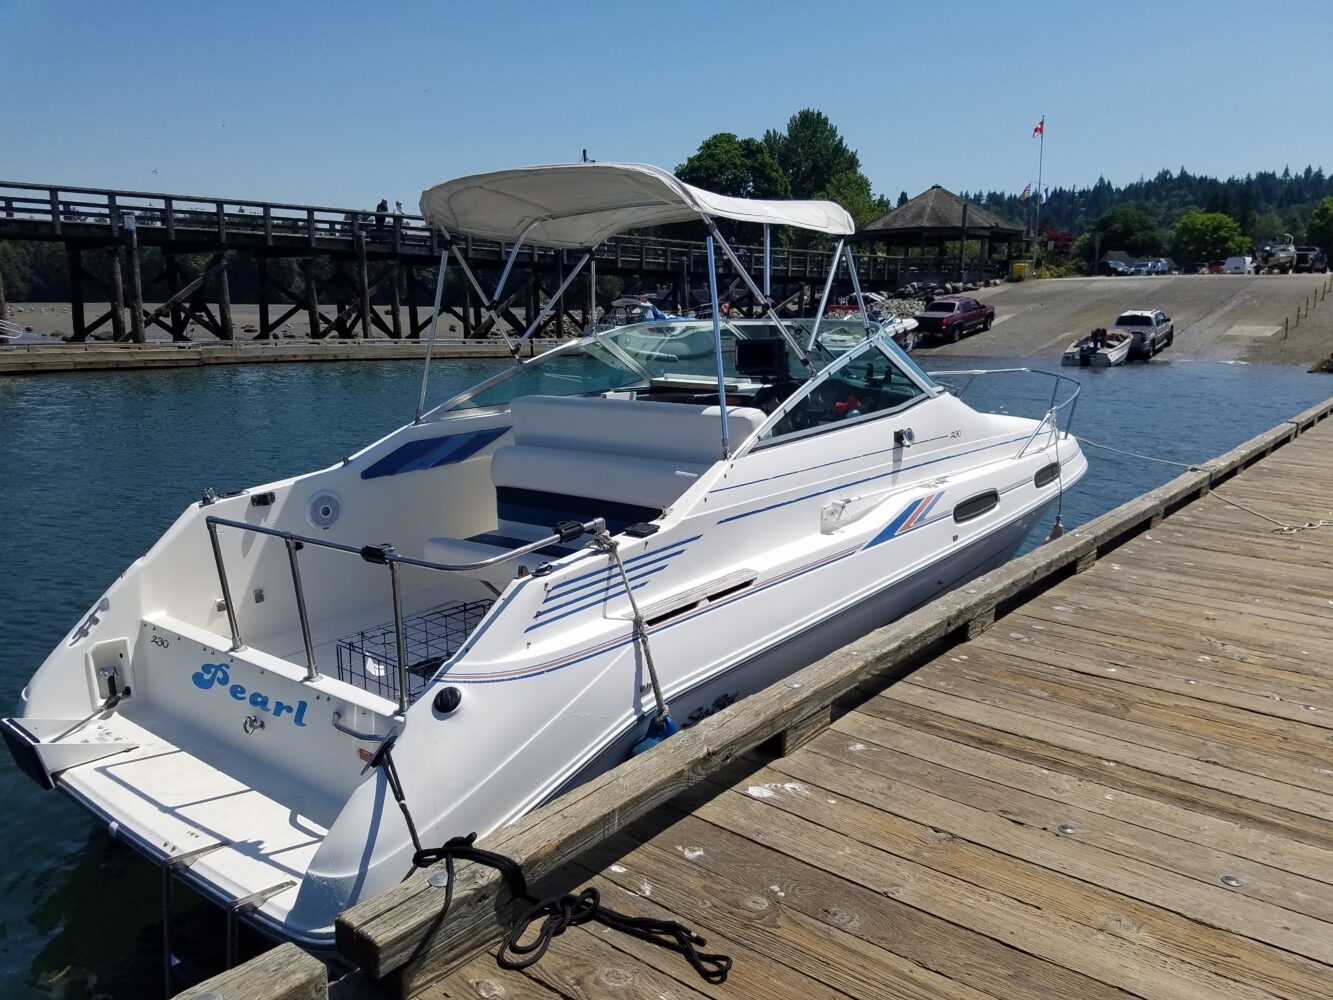 23 foot Sea Ray boat charter from Port Moody or North Vancouver